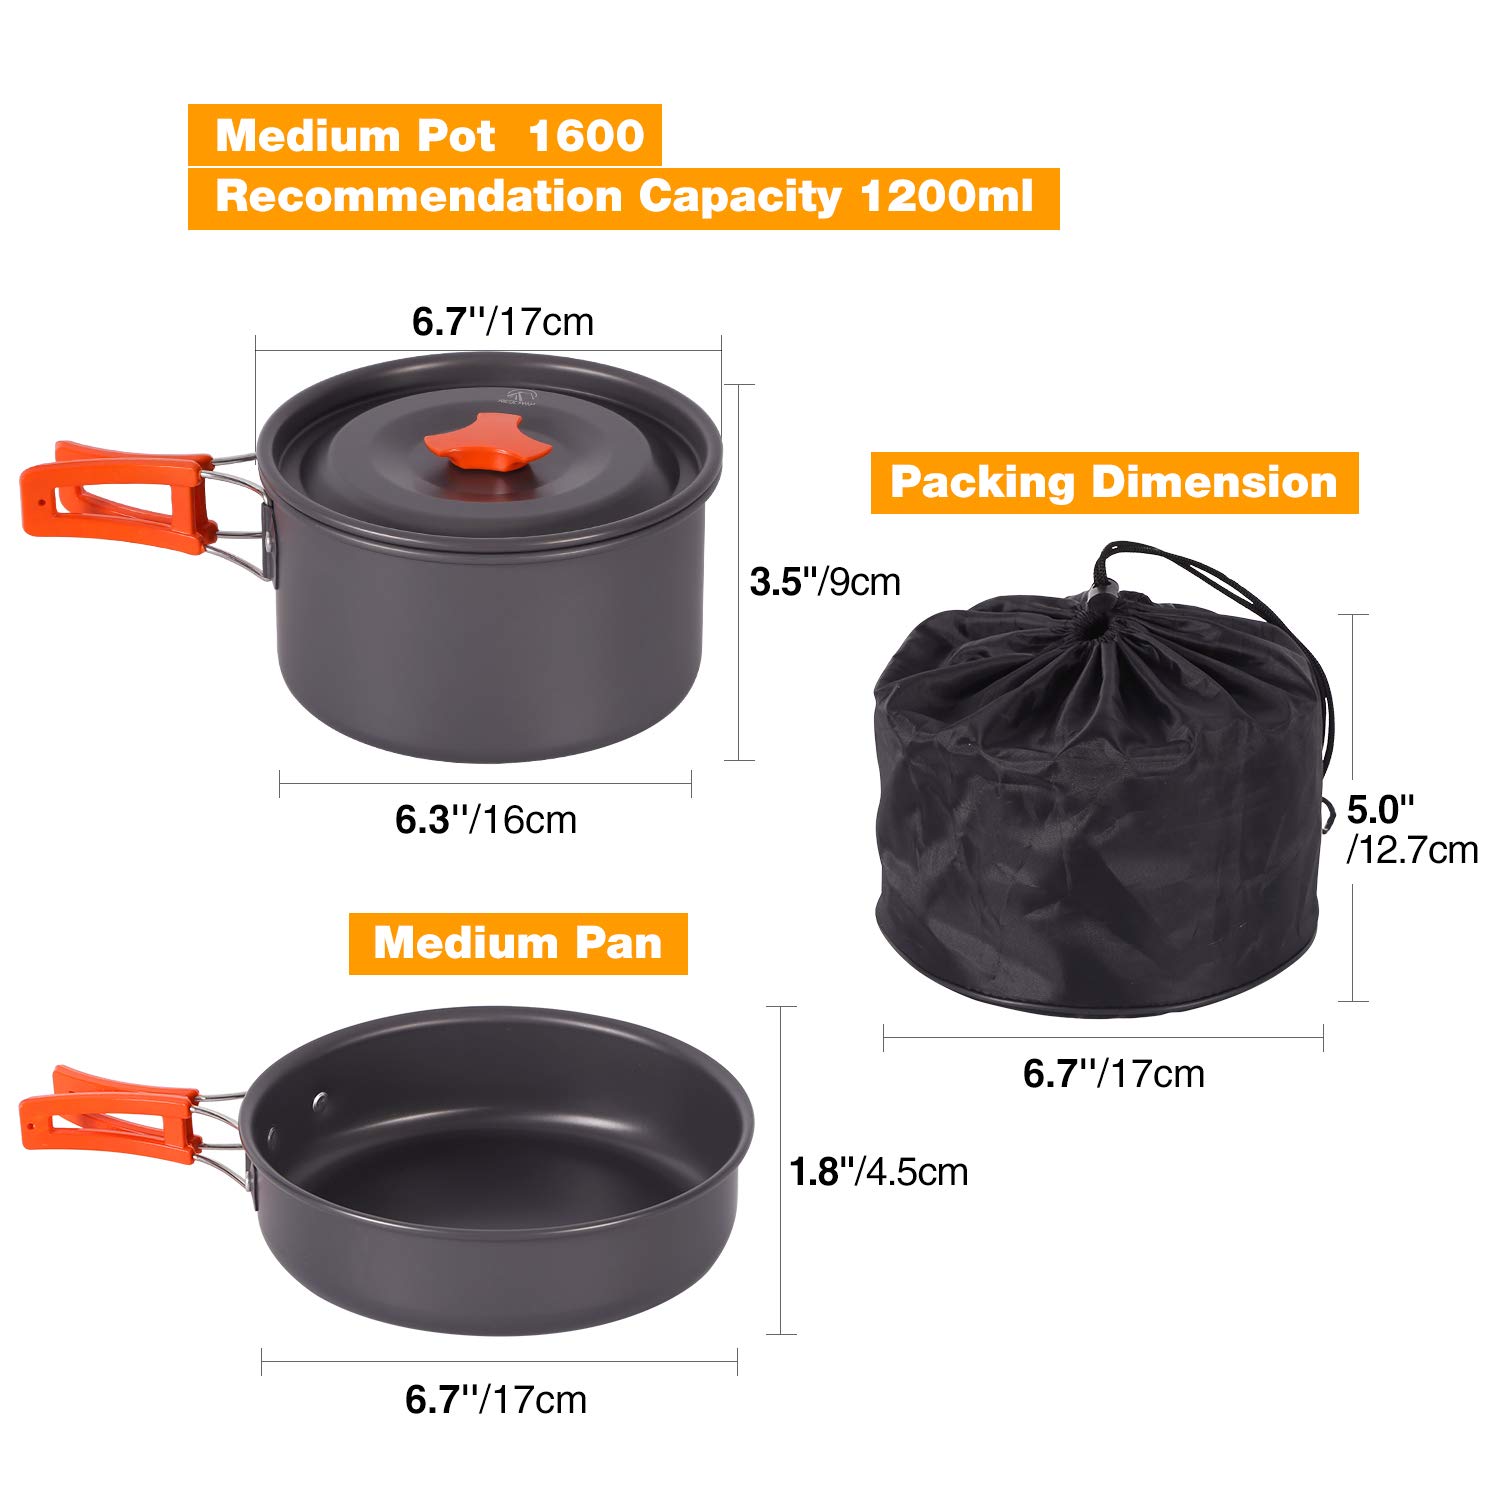 PCS Camping Cookware Mess Kit, Backpacking Camping Pot+Pan Set, Lightweight and Compact Cookware for Hiking,